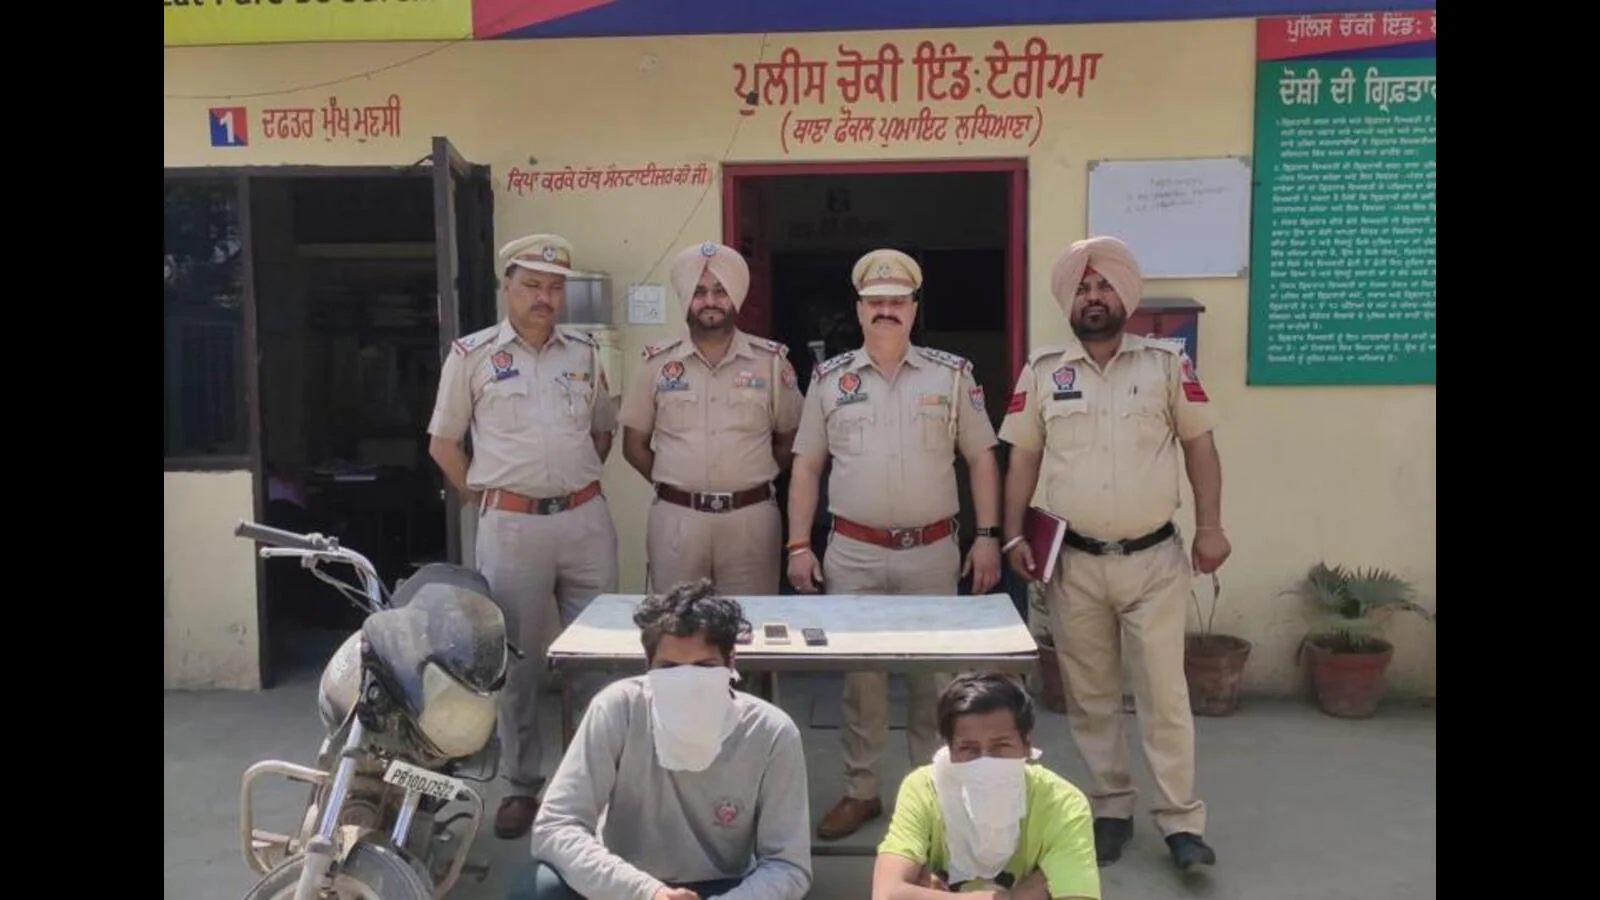 Ludhiana | Two arrested for snatching, 3 mobile phones recovered